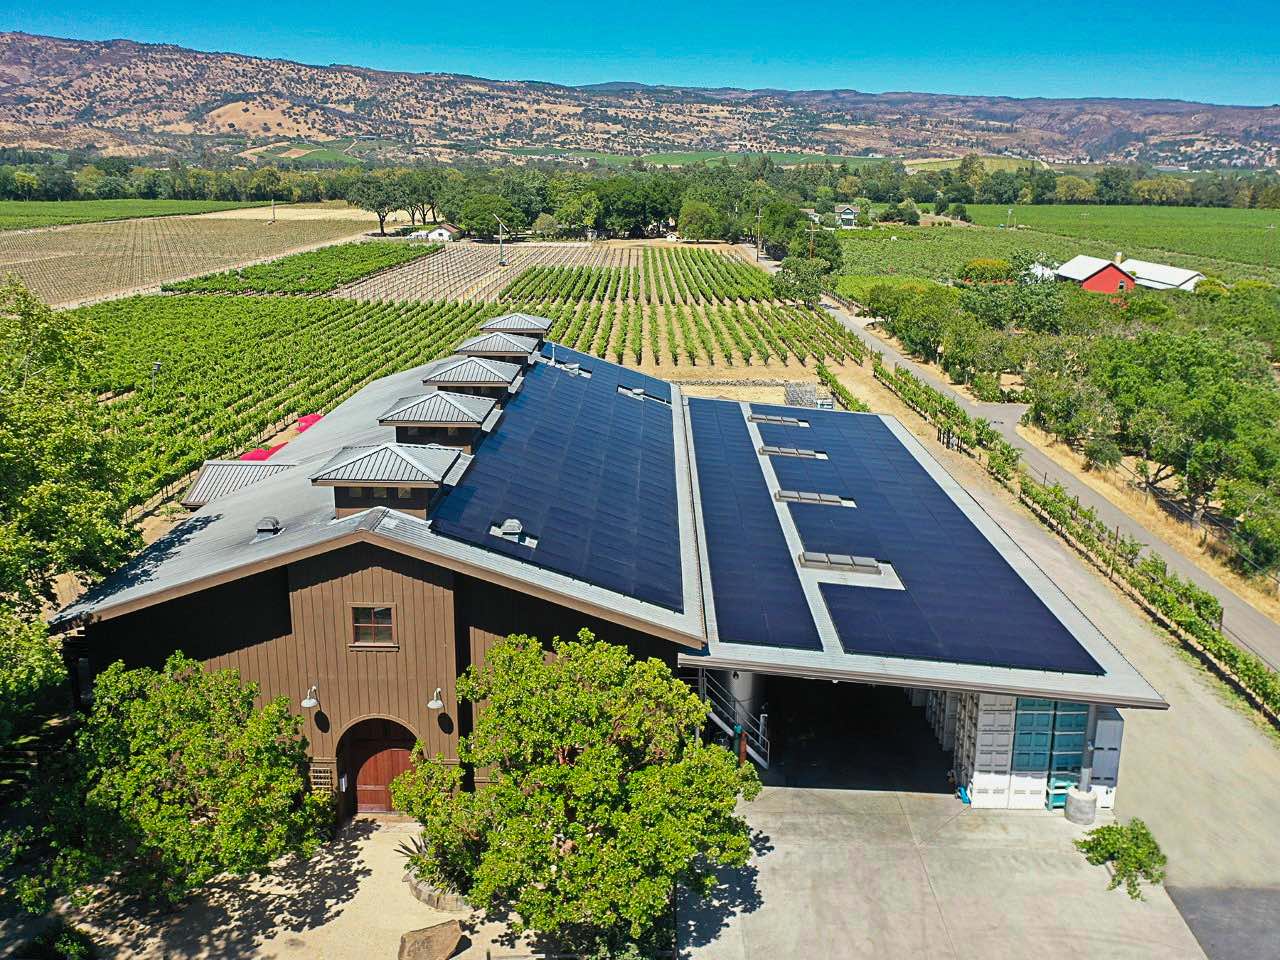 2021 LITE BIALE winery.